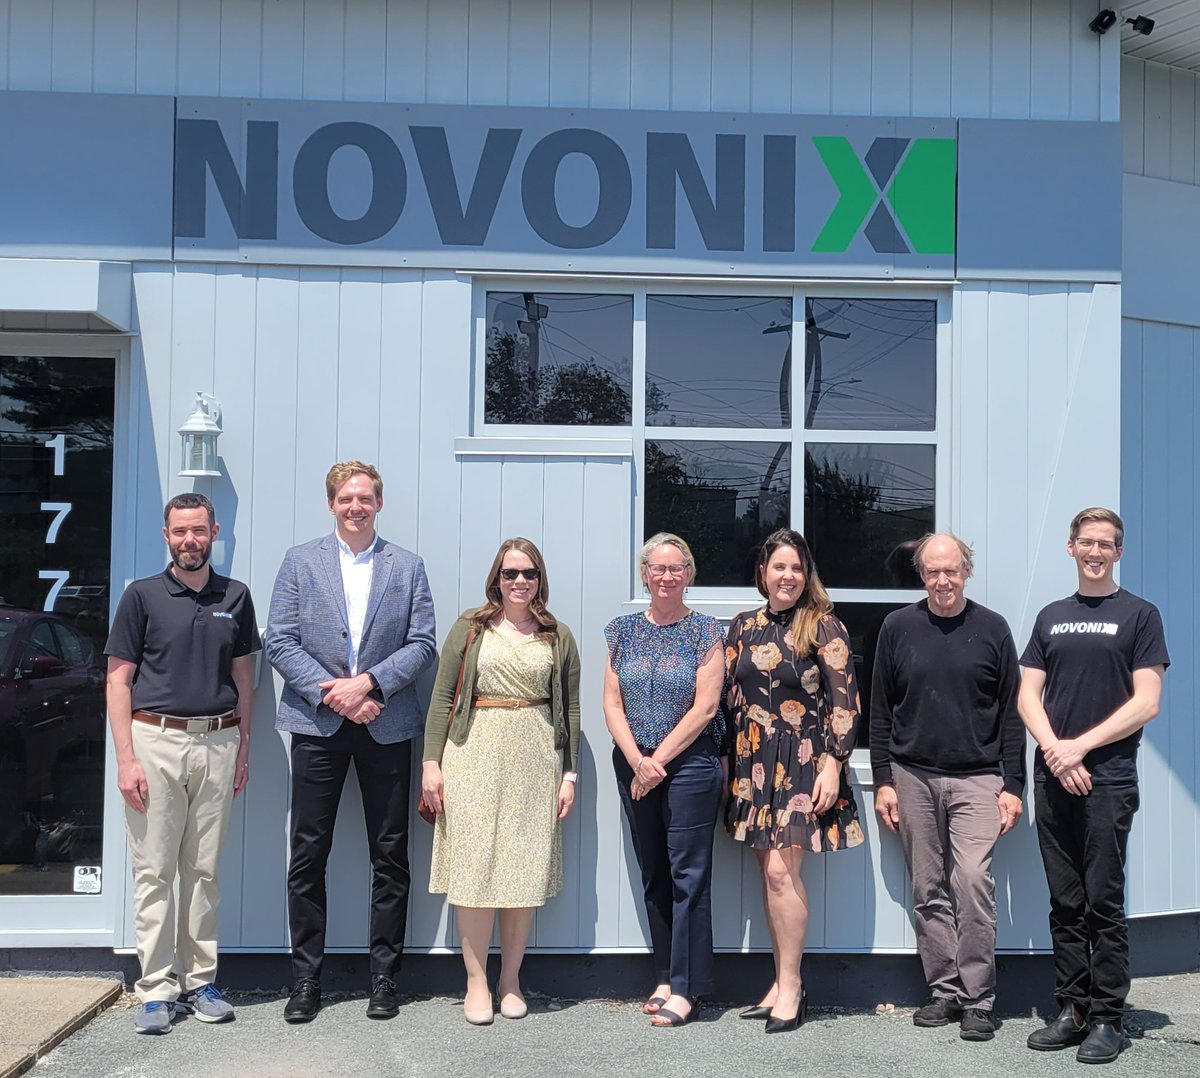 Today in Bedford, NS we were joined by members of @ISED_CA including #InnovationCanada ADM Andrea Johnston. It's always a welcome opportunity to showcase the innovation coming from our BTS division. 

#EV #NOVONIX #batterymaterials #cleanenergy $NVX #batterysupplychain